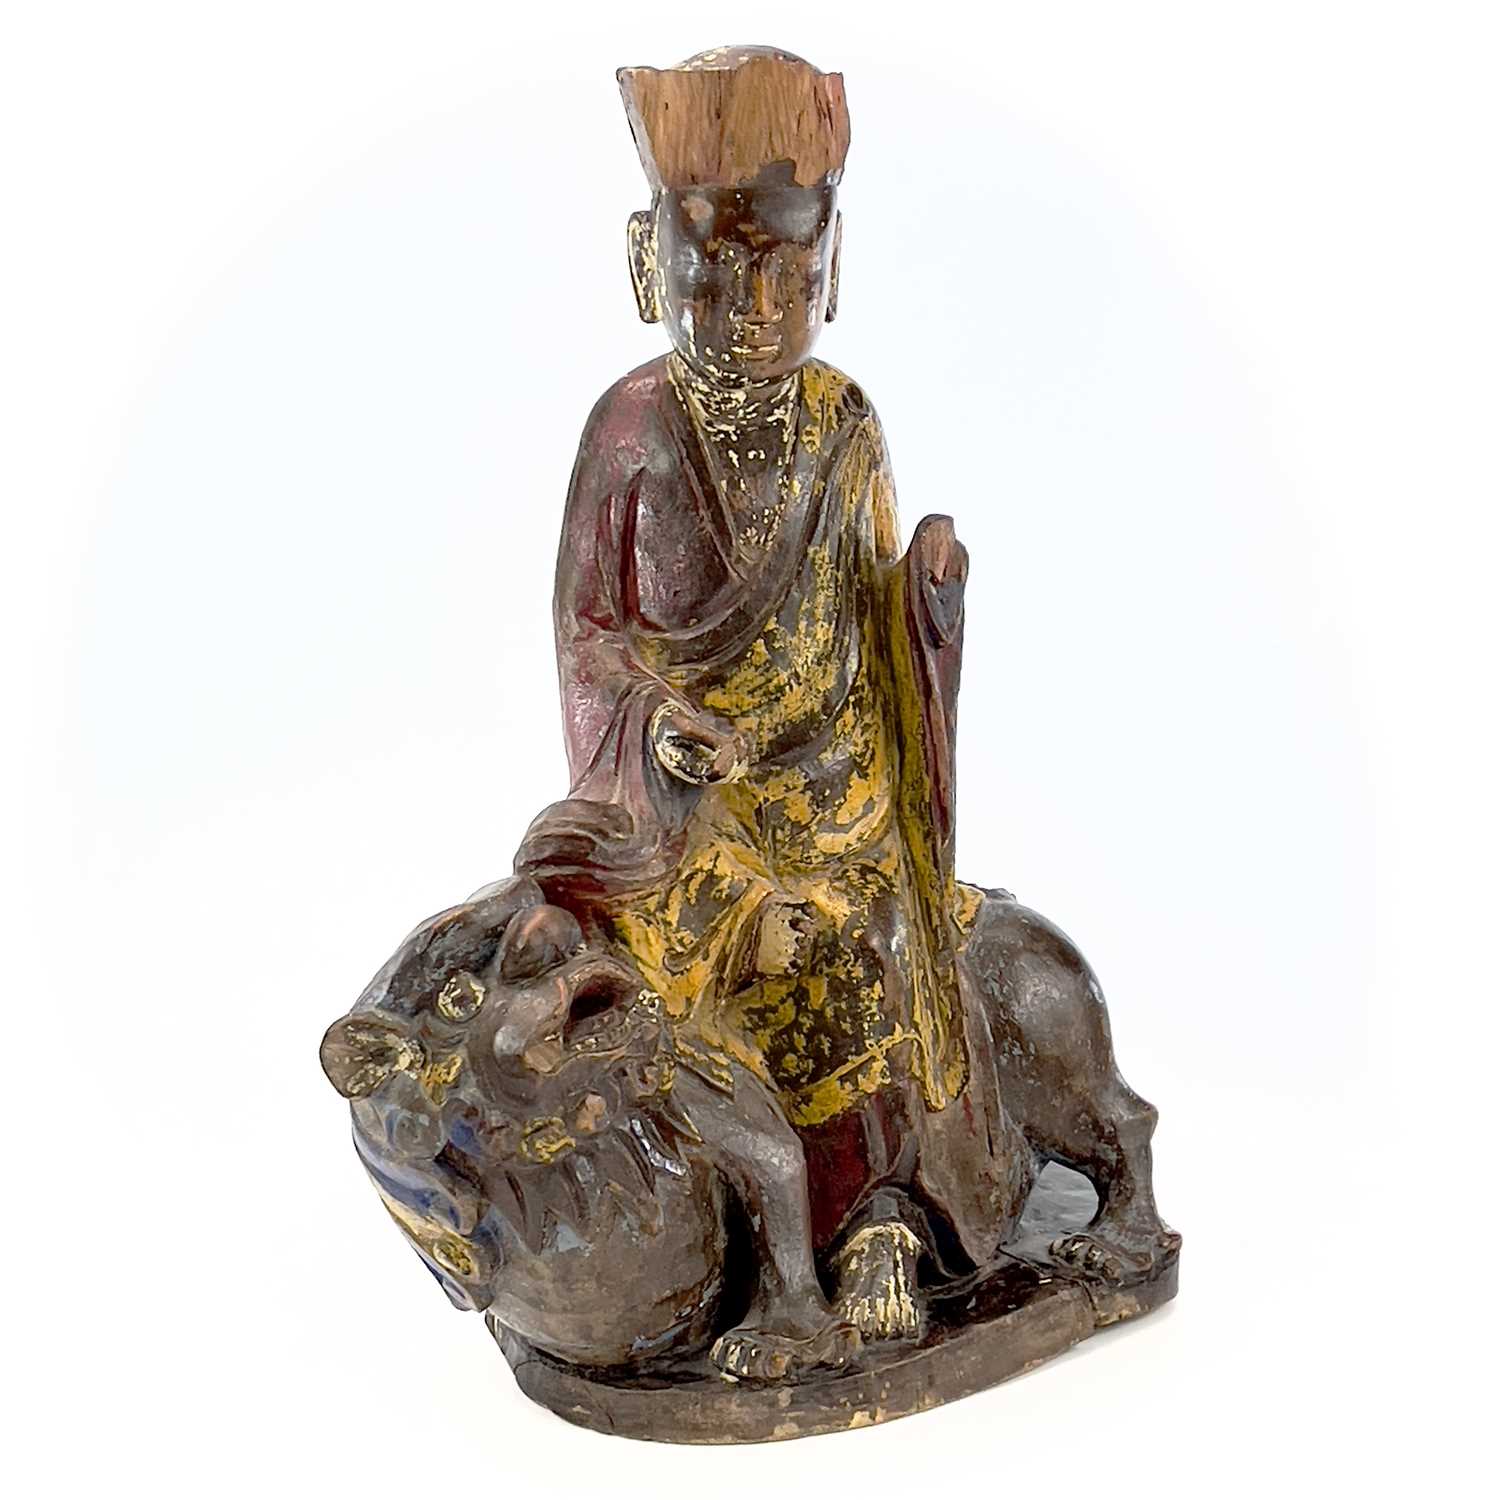 A Chinese carved and painted figure, 19th century, seated in robes wearing a high crown and riding a - Image 7 of 11